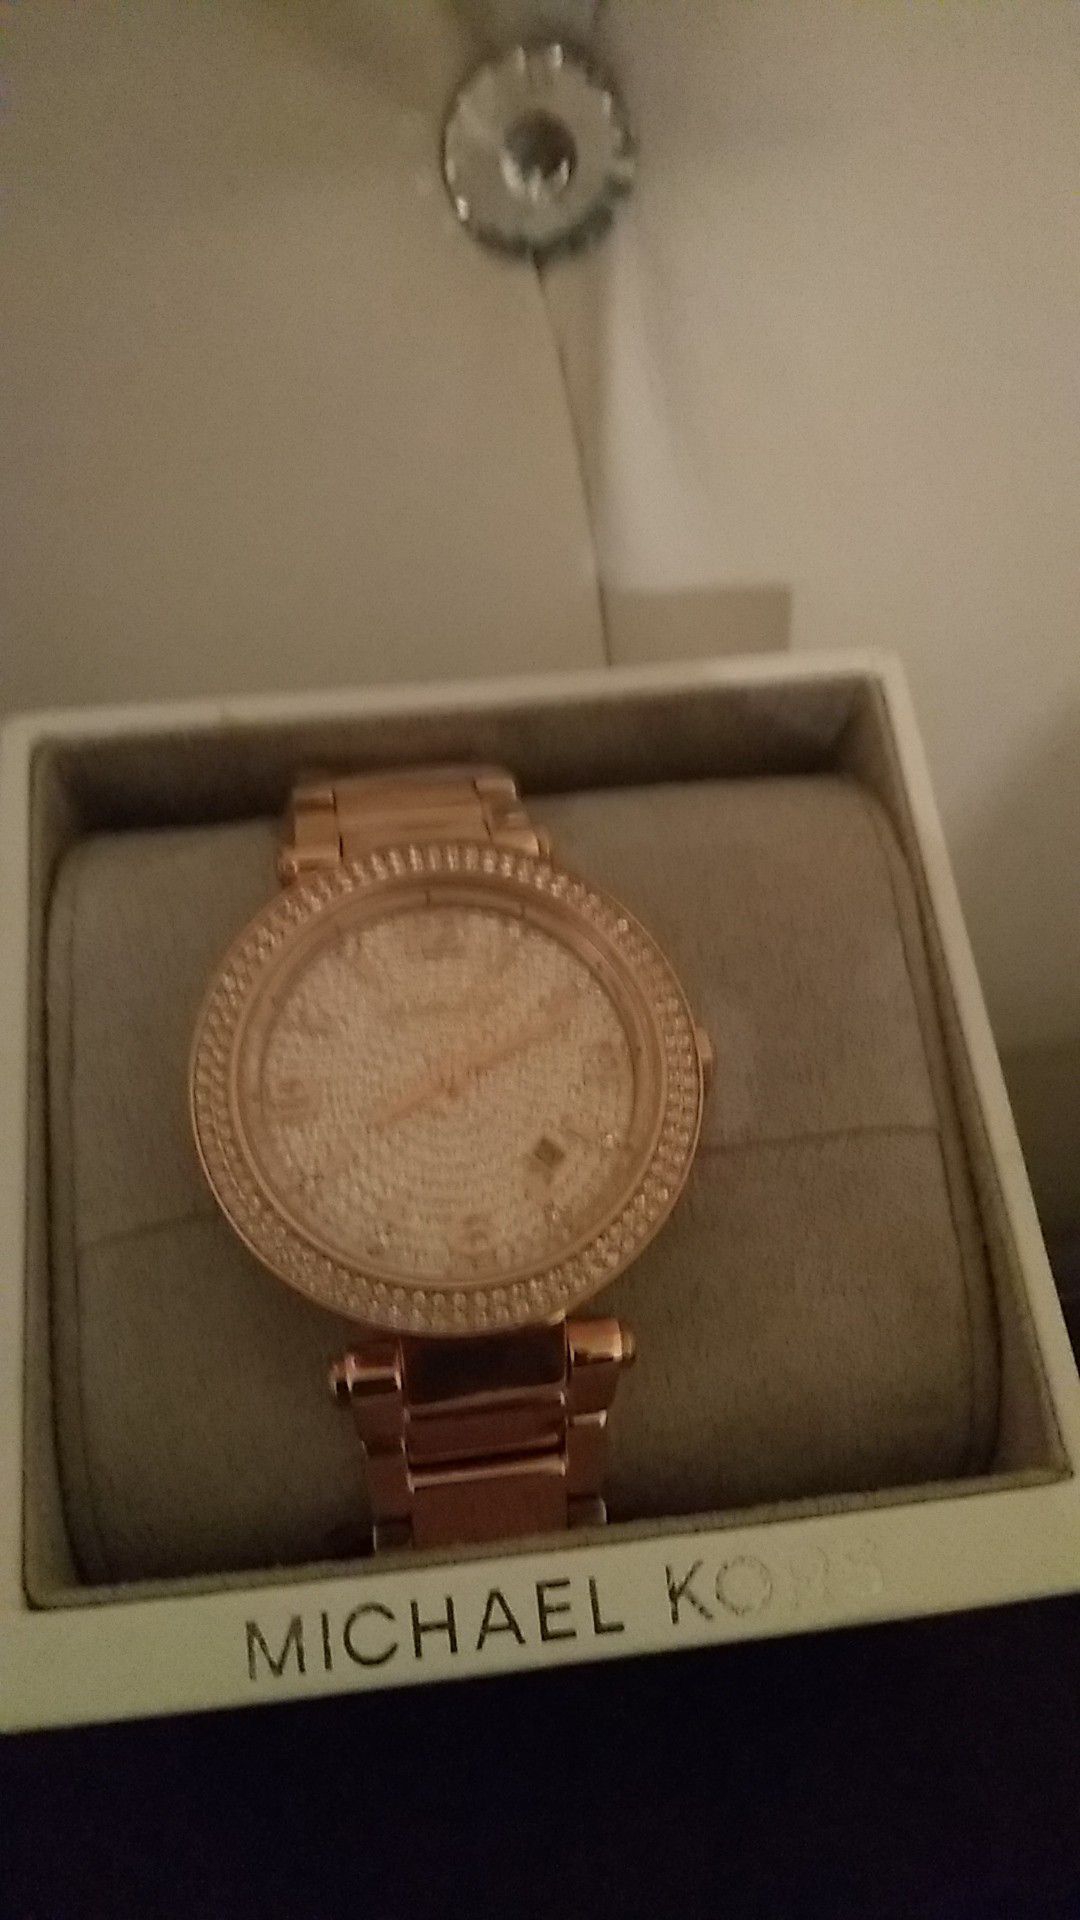 Brand New watch Michael kors for lady for Sale in Costa Mesa, CA - OfferUp